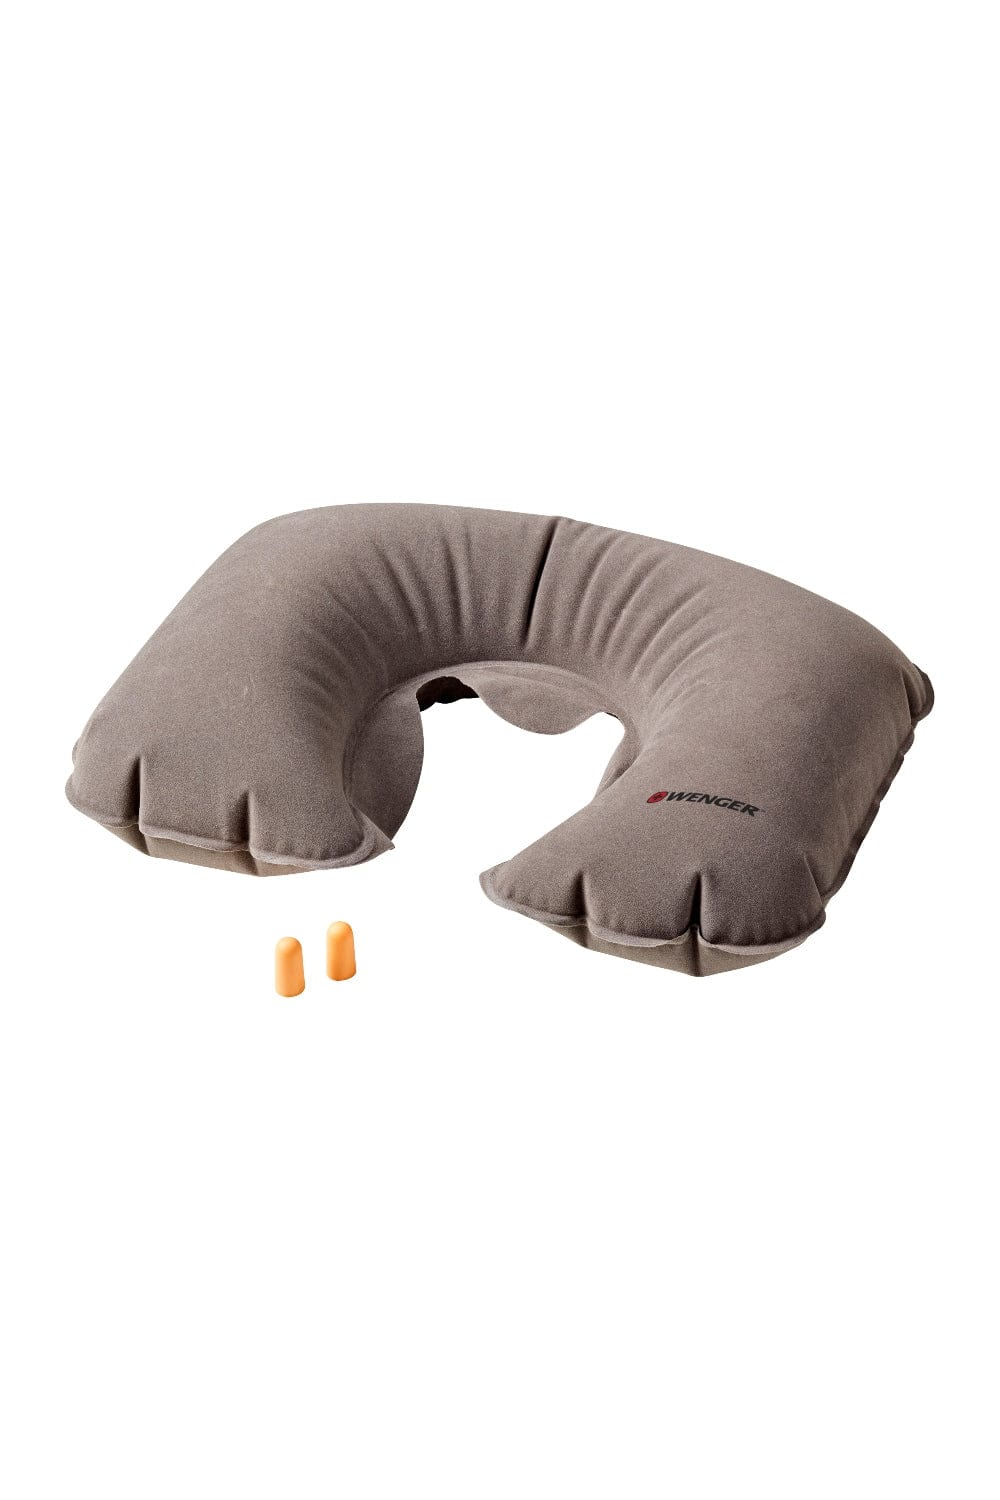 Wenger TA Inflatable Neck Travel Pillow with Ear Plugs Grey - 604585